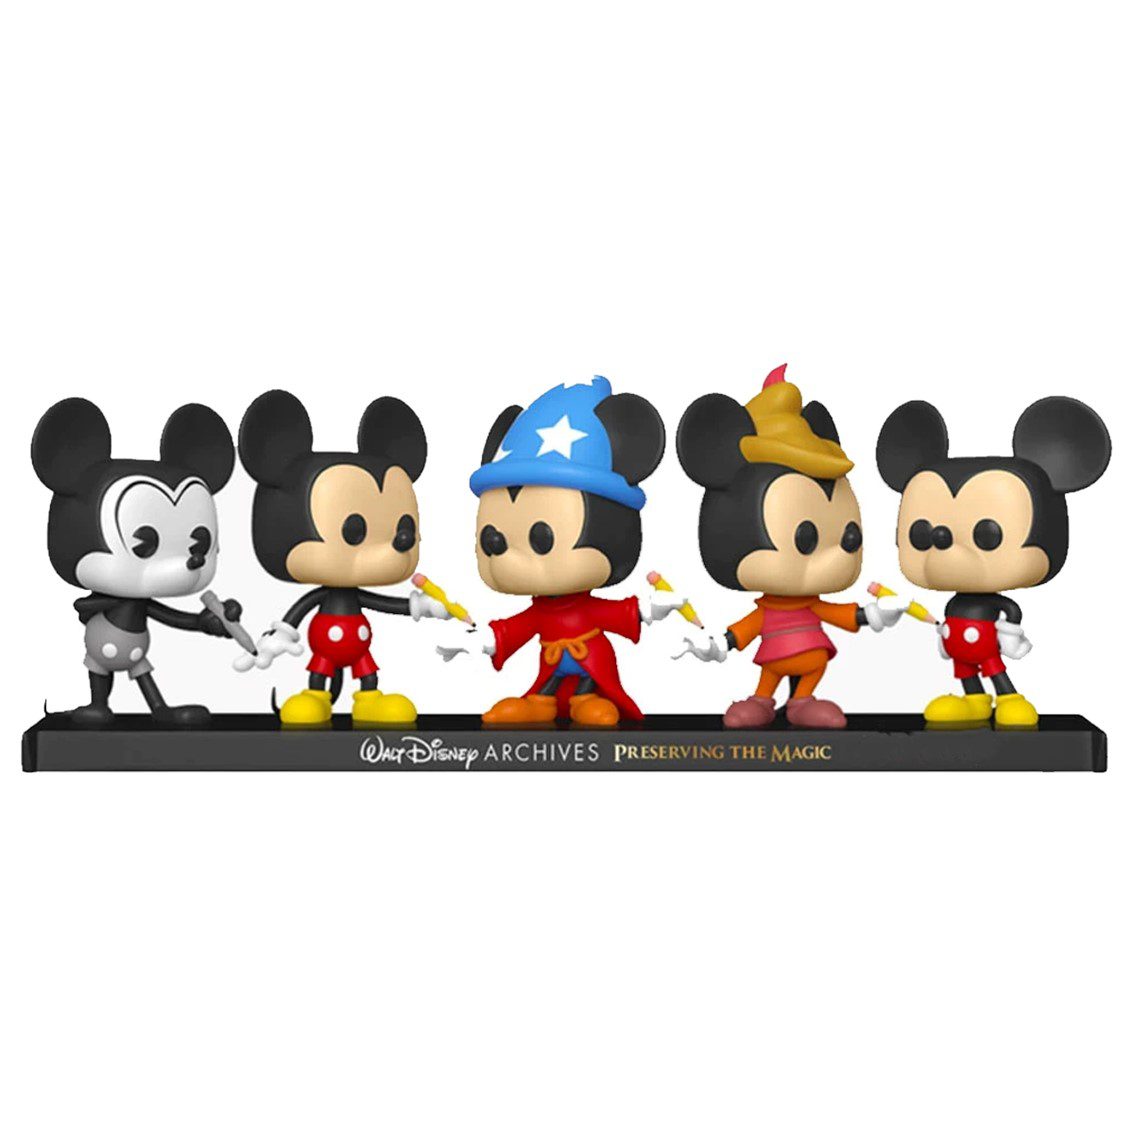 889698511186-PN-51118-Cod.-Articulo-MGS0000005168-Funko-pop-disney-archivos-pack-premium-5-mickey-mouse-51118-2